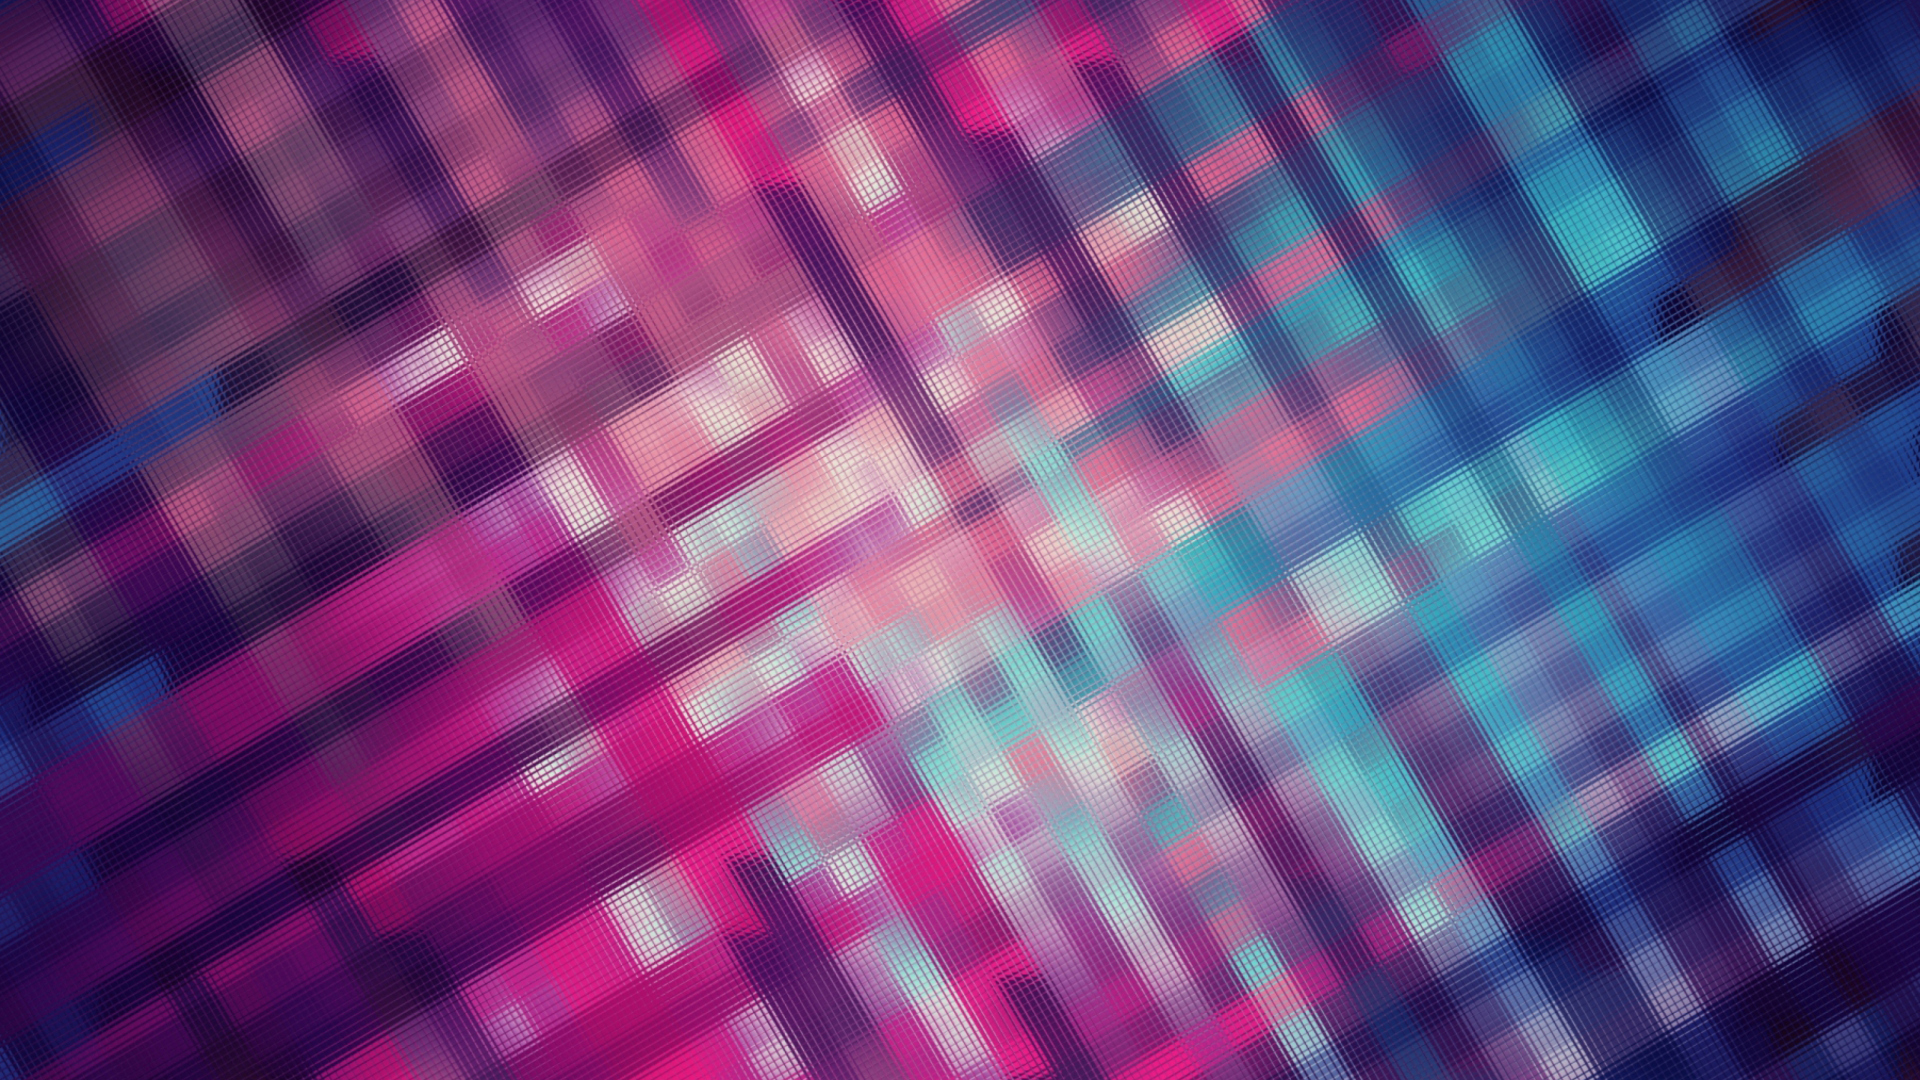 Das Pink And Blue Abstraction Wallpaper 1920x1080